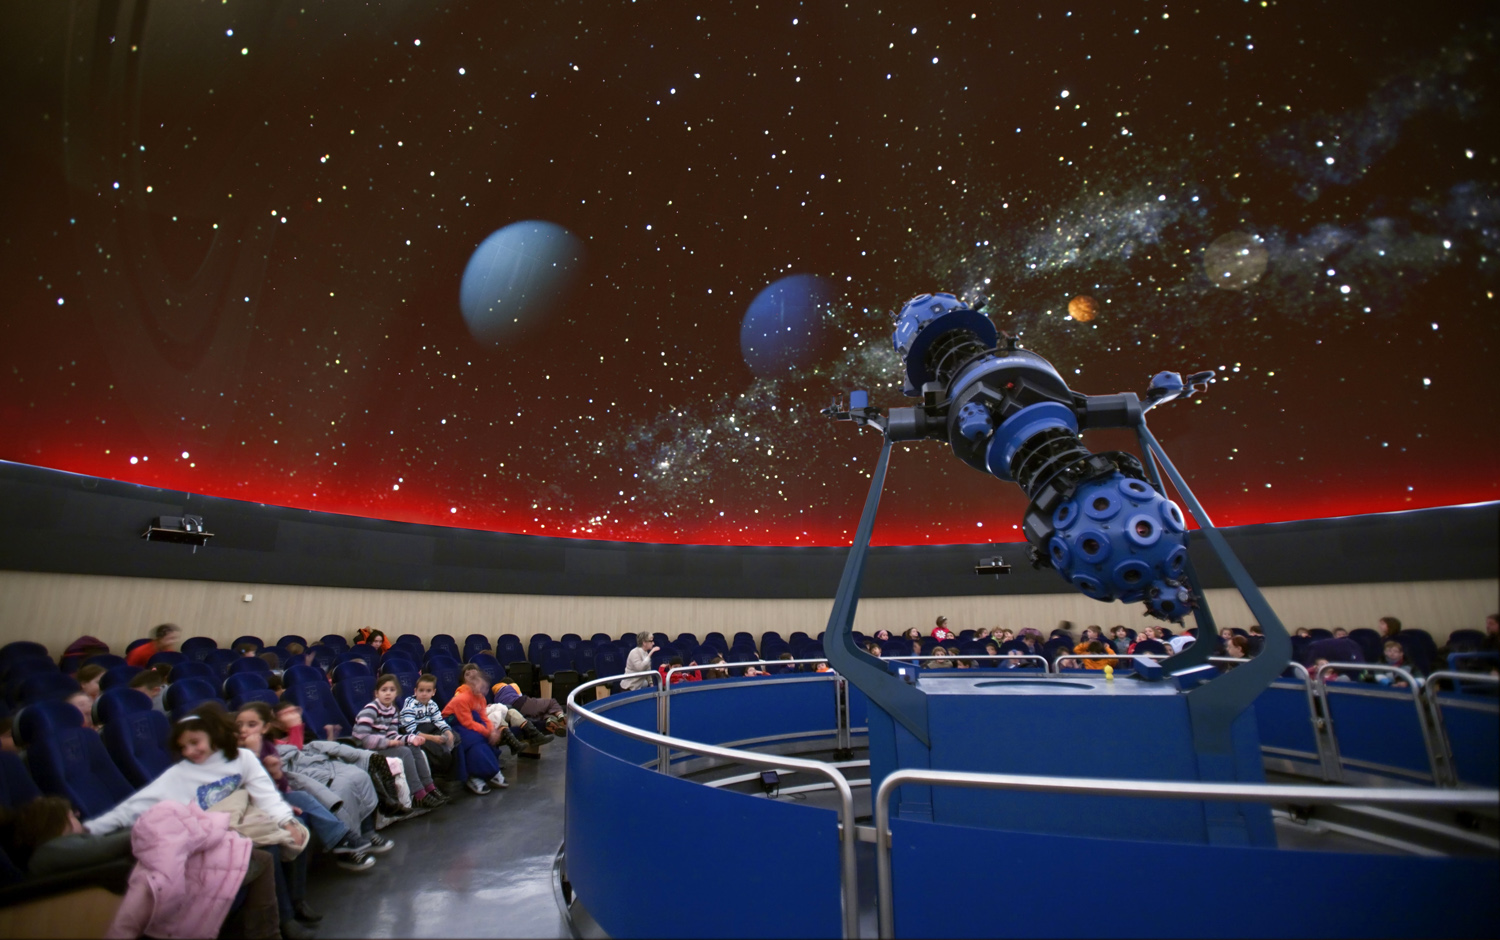 Tornamira Room and star projector of the Pamplona Planetarium